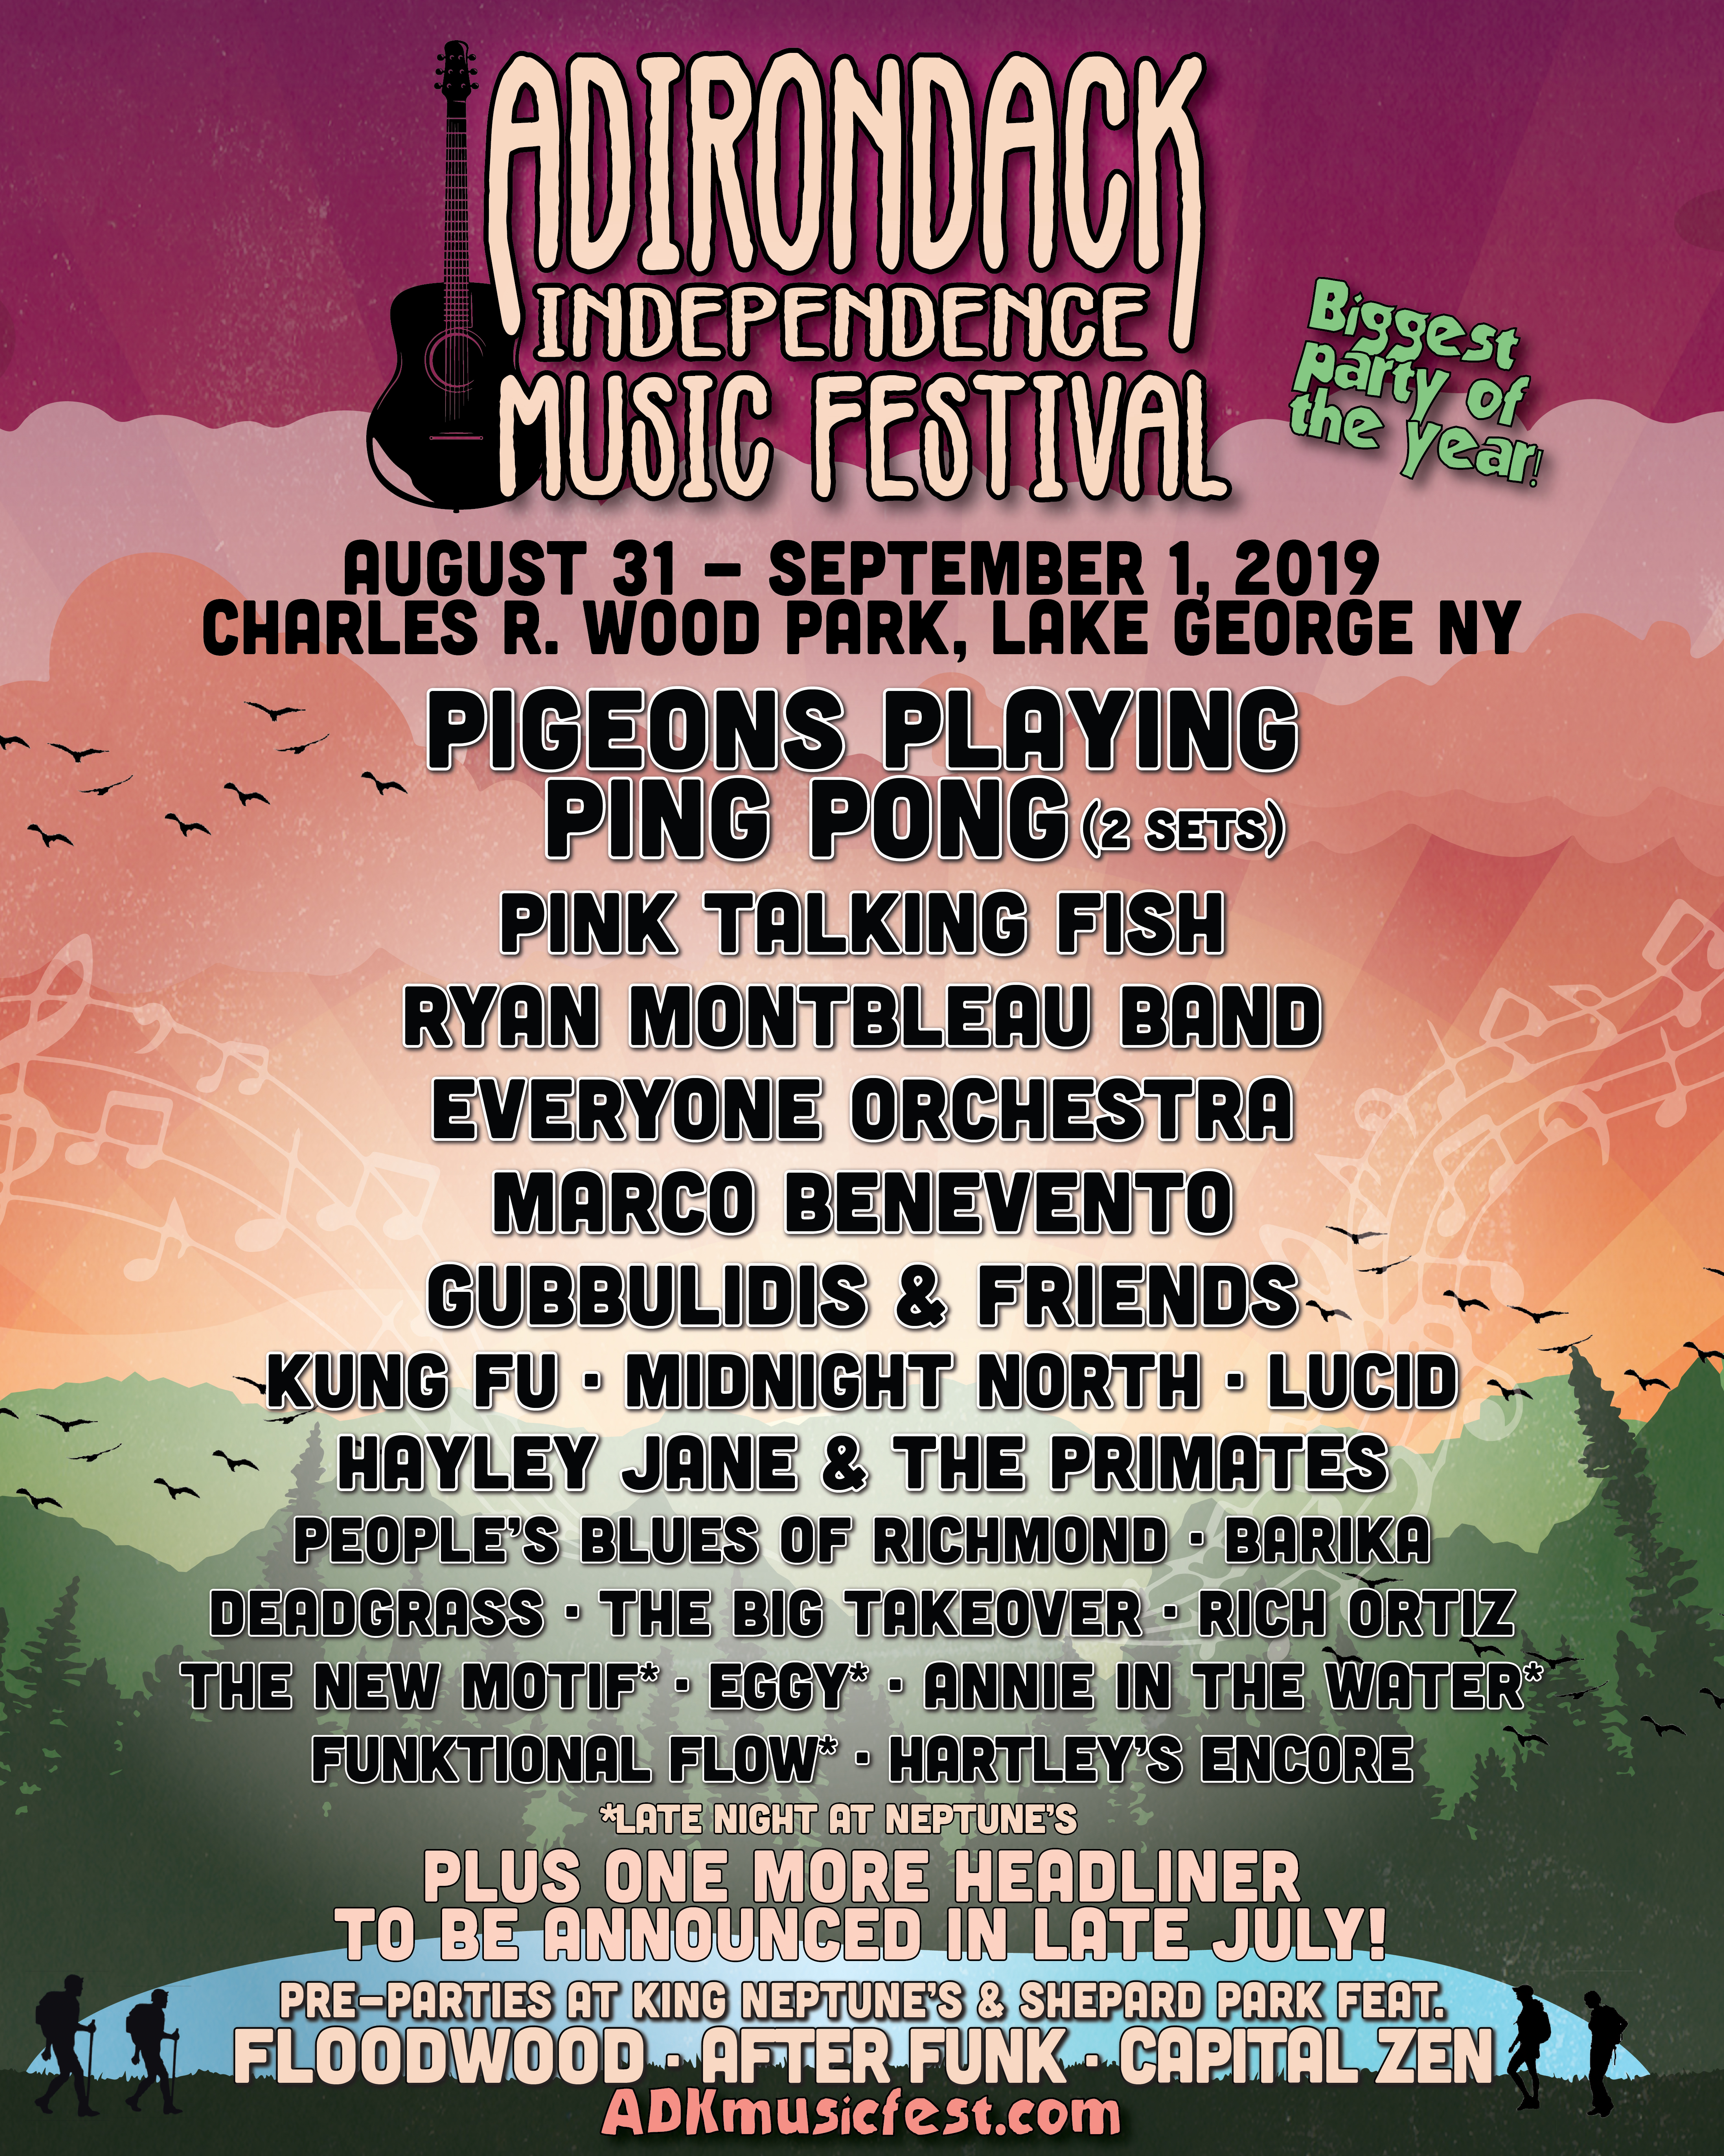 Adirondack Independence Music Festival To Feature Pigeons Playing Ping Pong, Pink Talking Fish, Marco Benevento and More